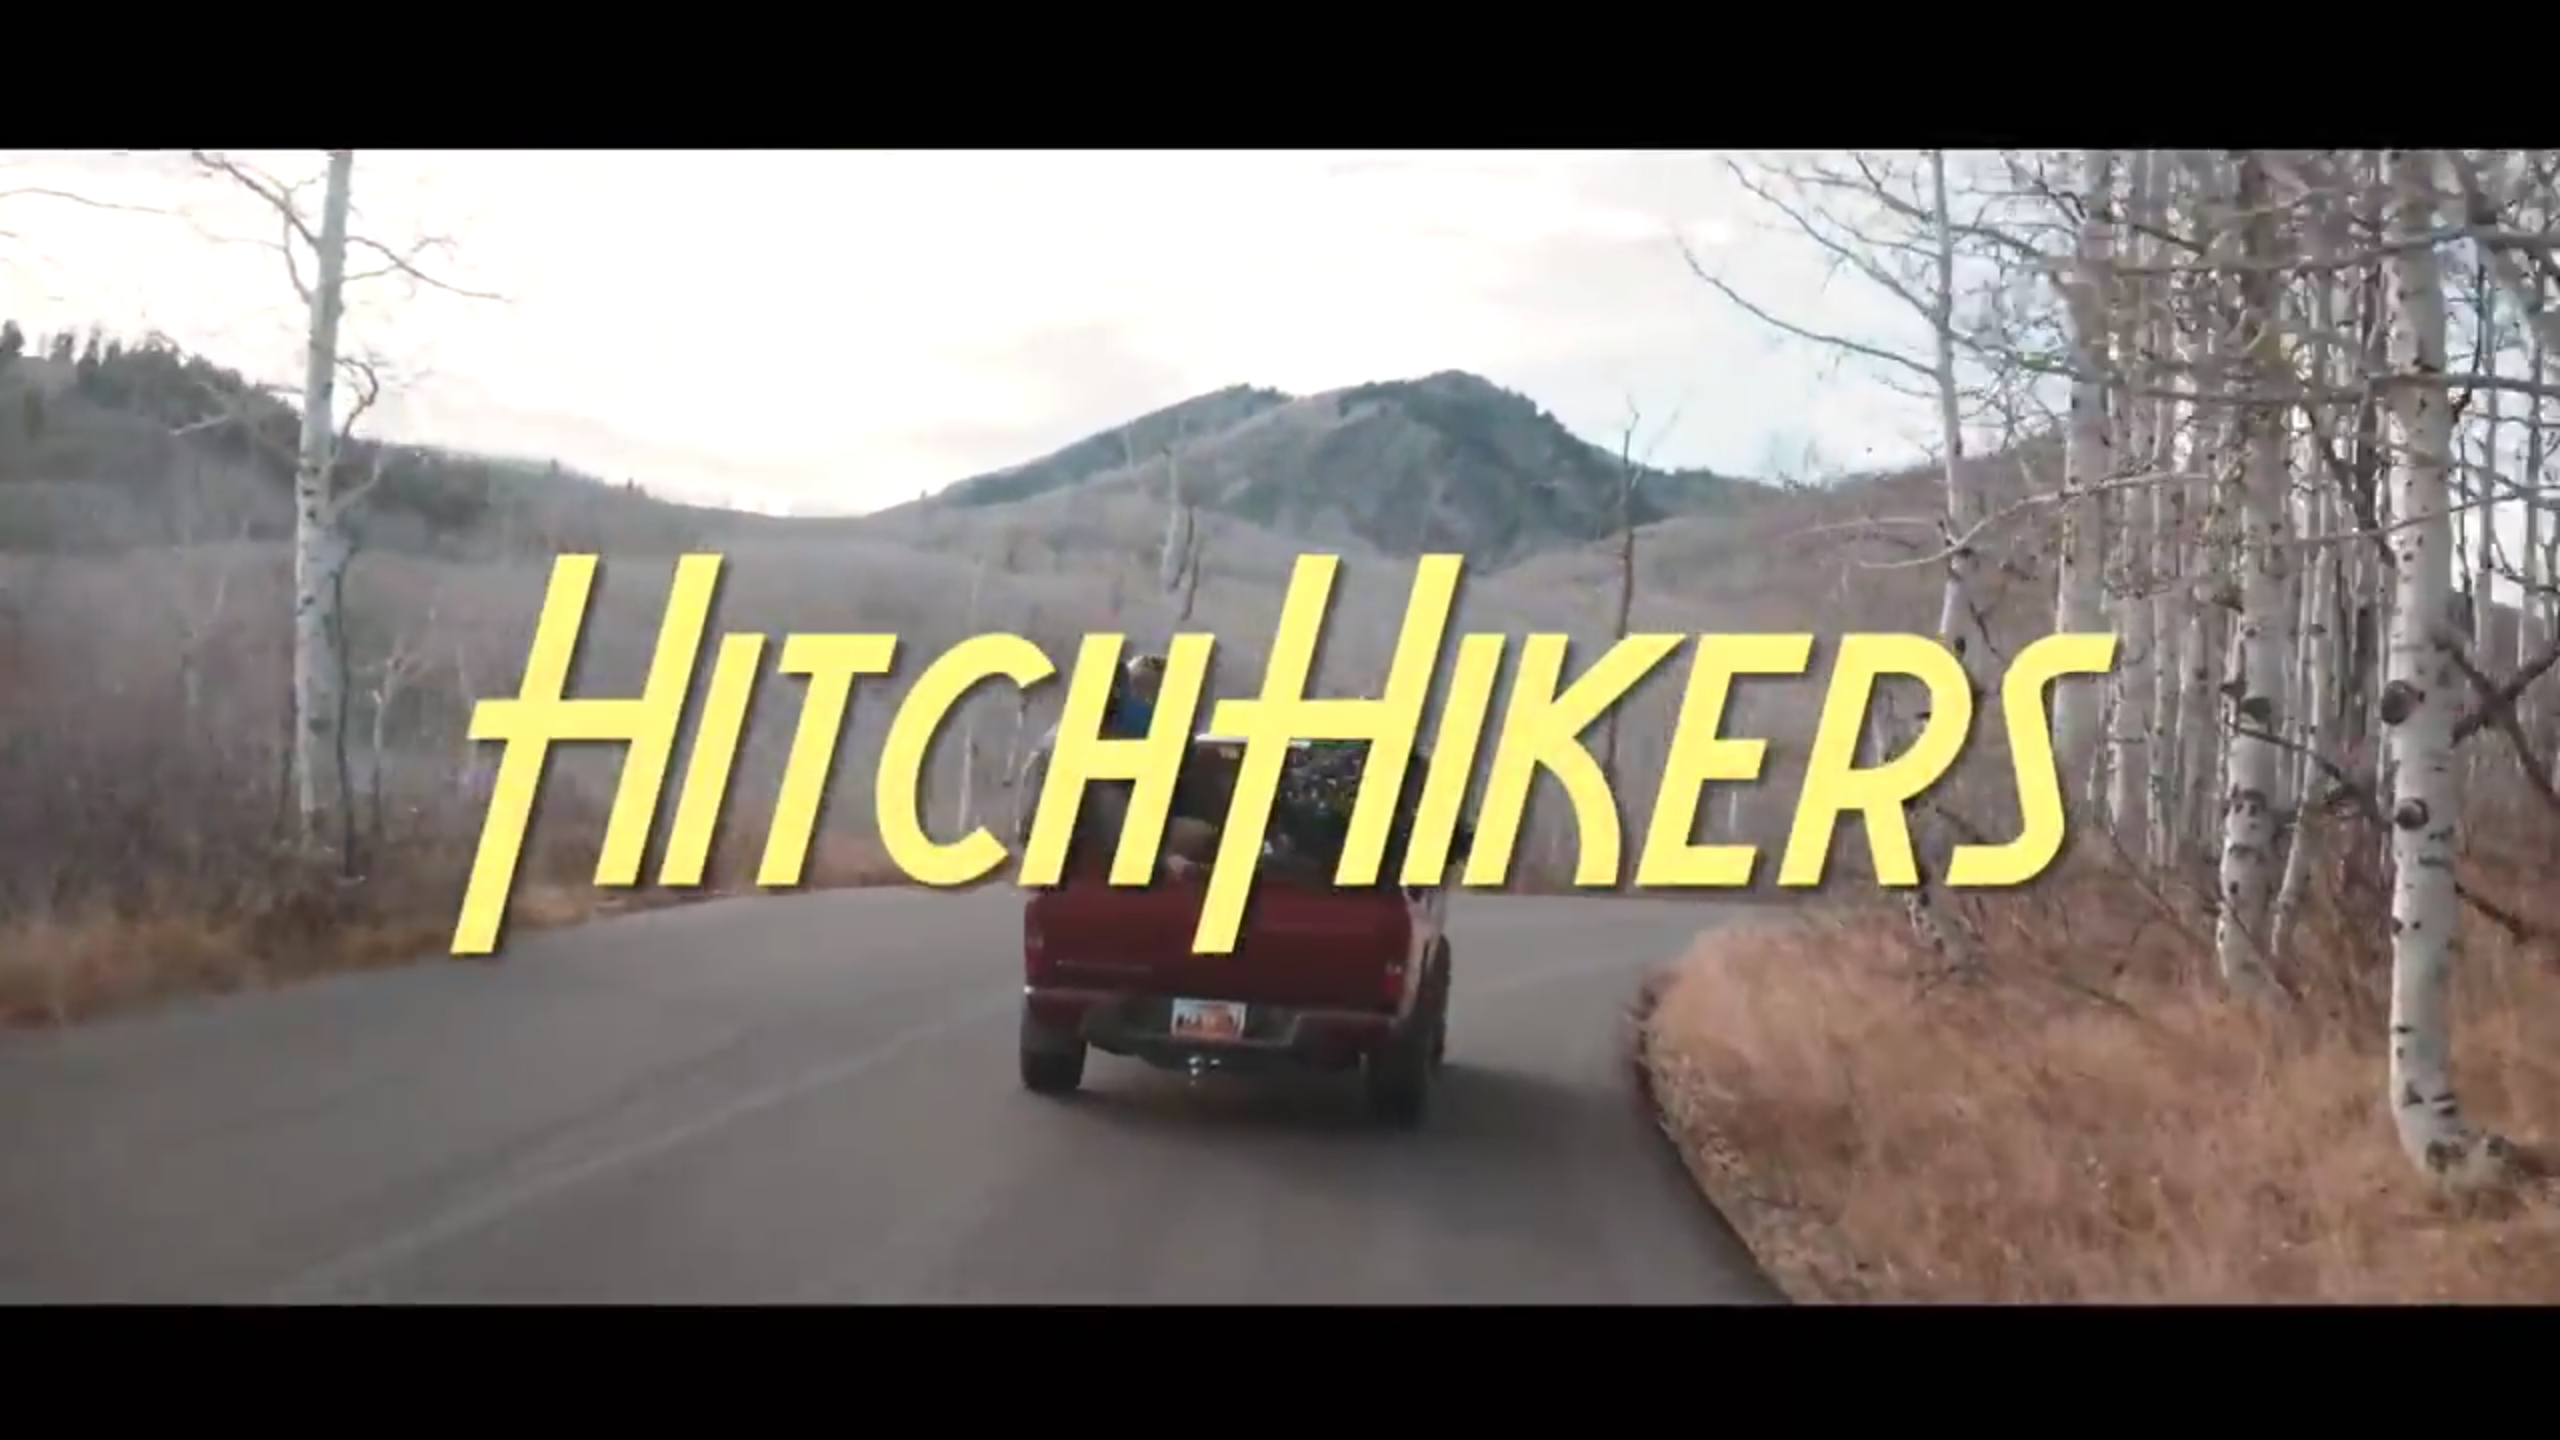 HitchHikers!